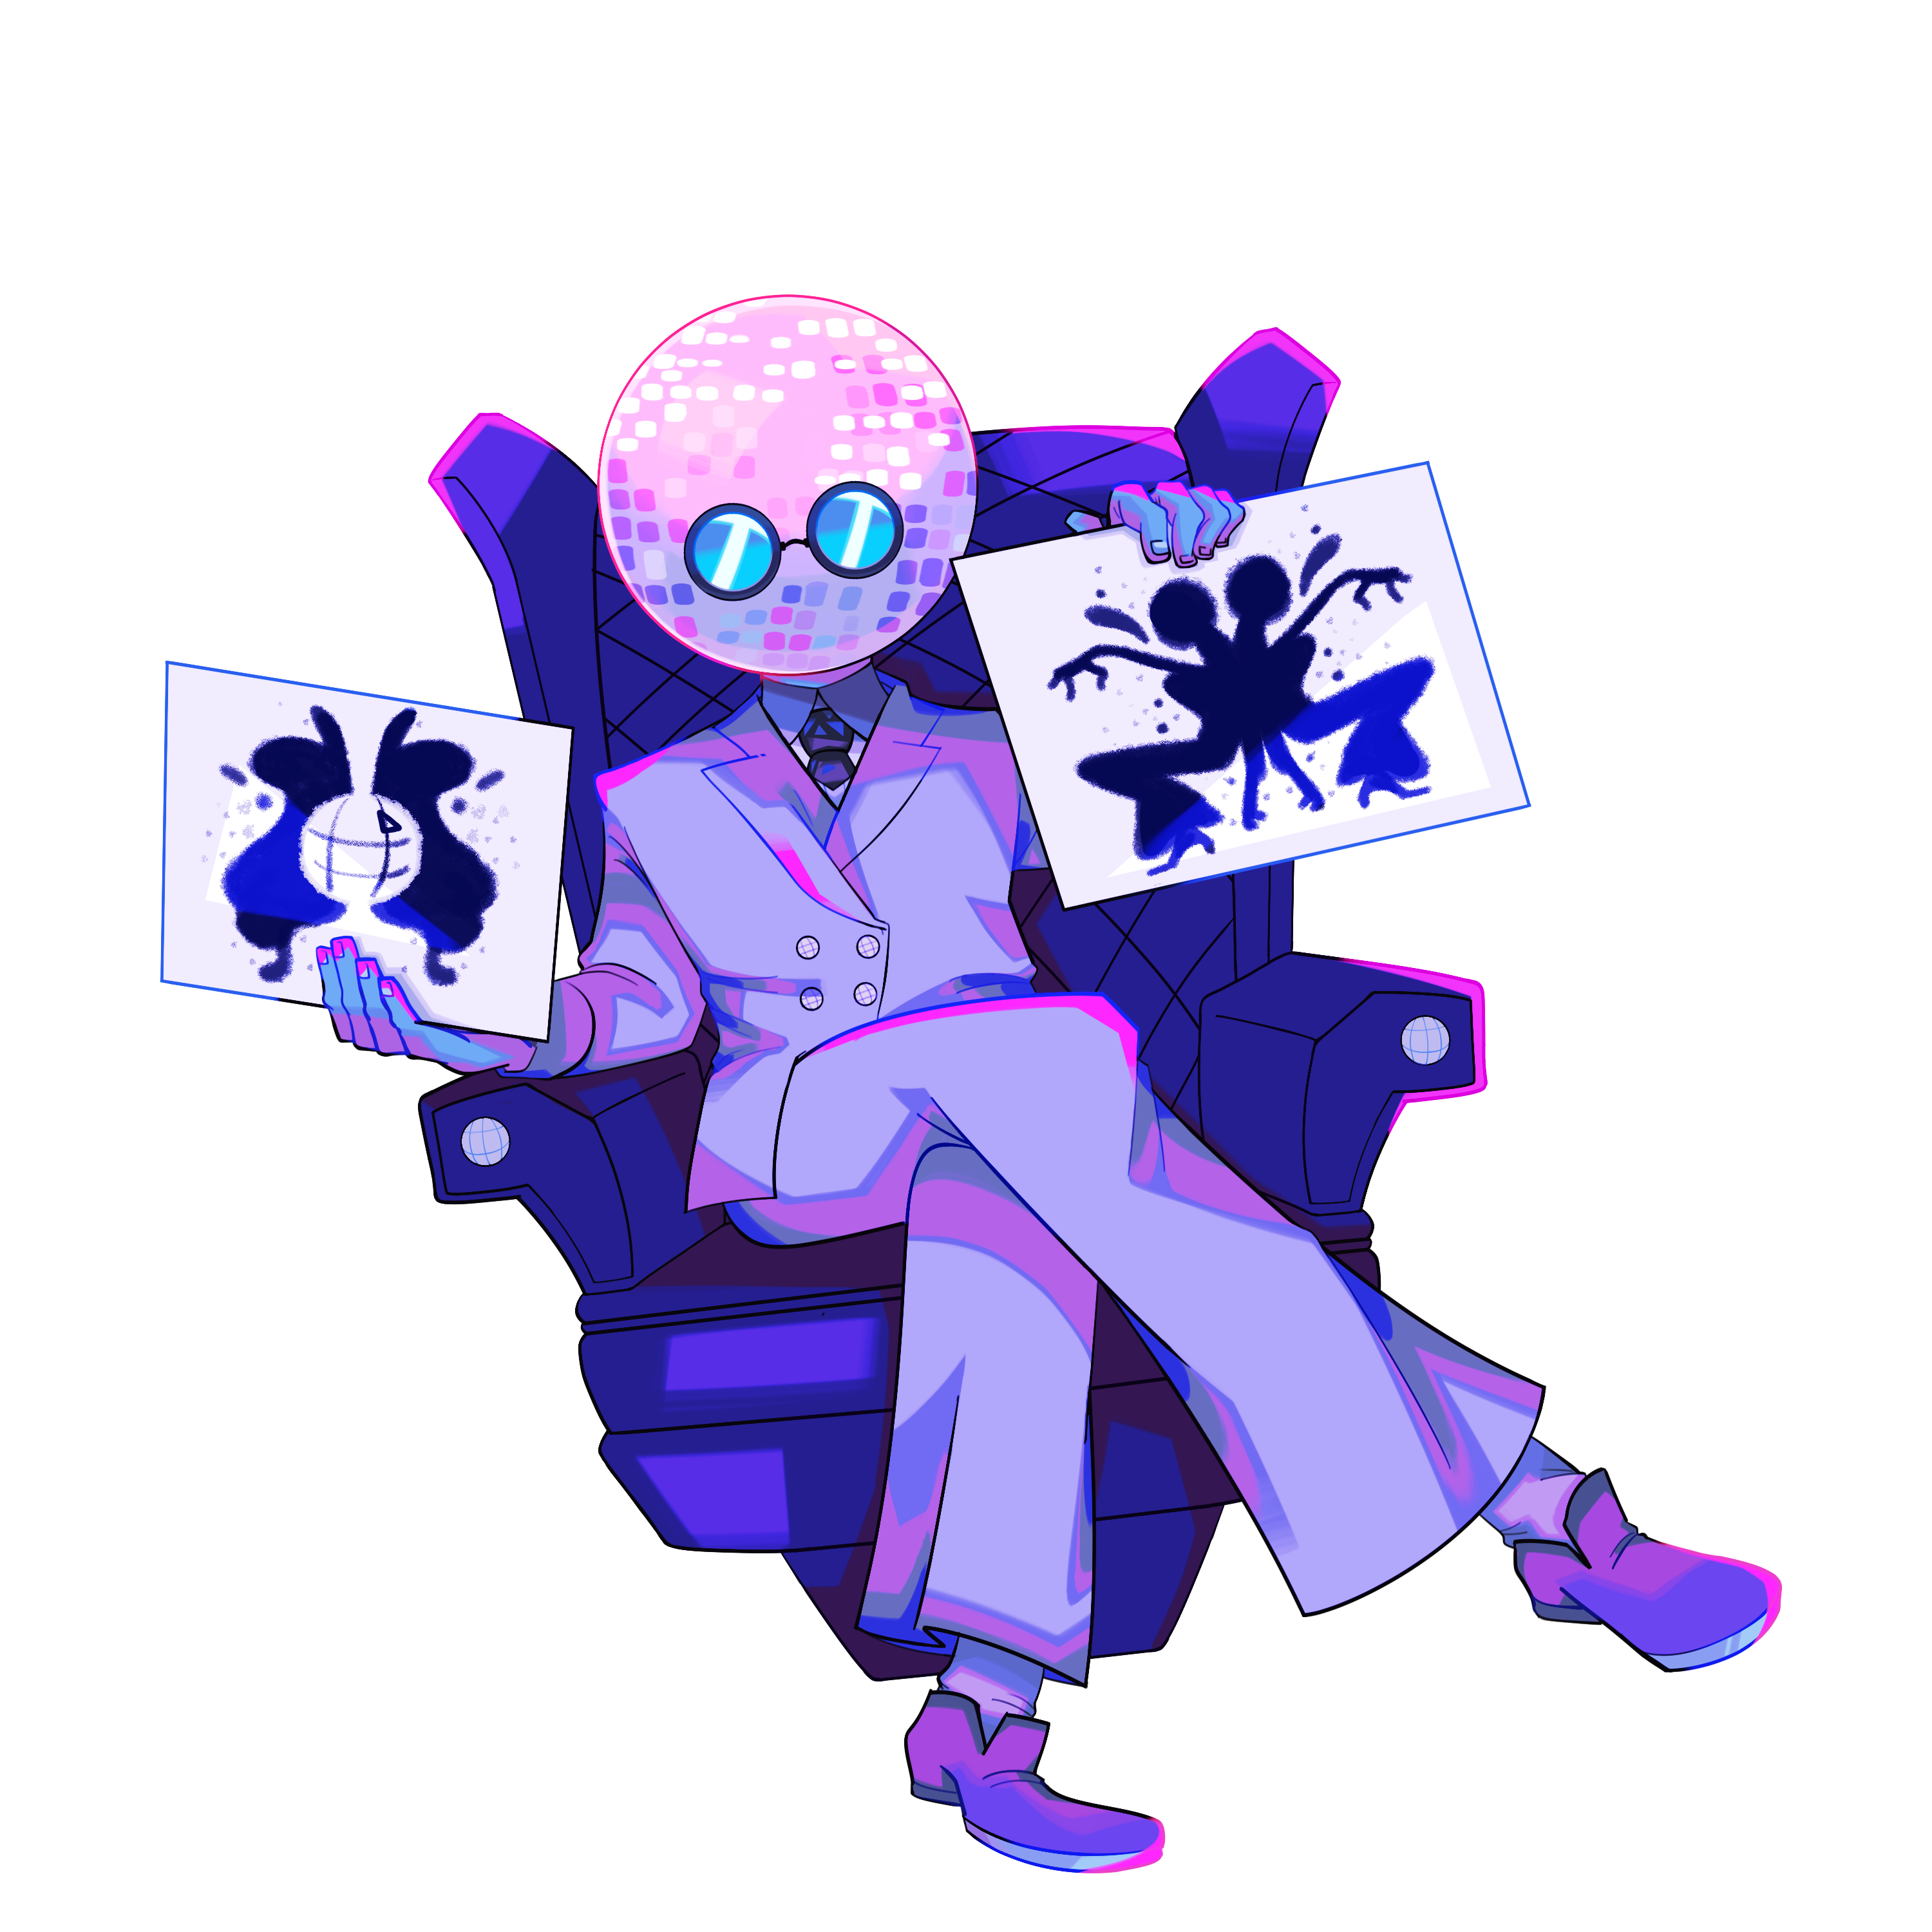 Illustrative Commission for Musician Discoholic Music. The artwork depicts a humanoid figure with a dicoball head , glasses placed a little lower on the frame of the head , wearing a suit and tie with a sweater underneath. He is sitting crosslegged on a leather armchair with two discoballs situated on each arm. The colors are mostly monochromatic using different shades of purple however other colors such as blue are present within the image. The character is holding up two inkblot illustrations , one of which is an abstract version of a discoball situated on his right hand and one depicting dancers on his left.